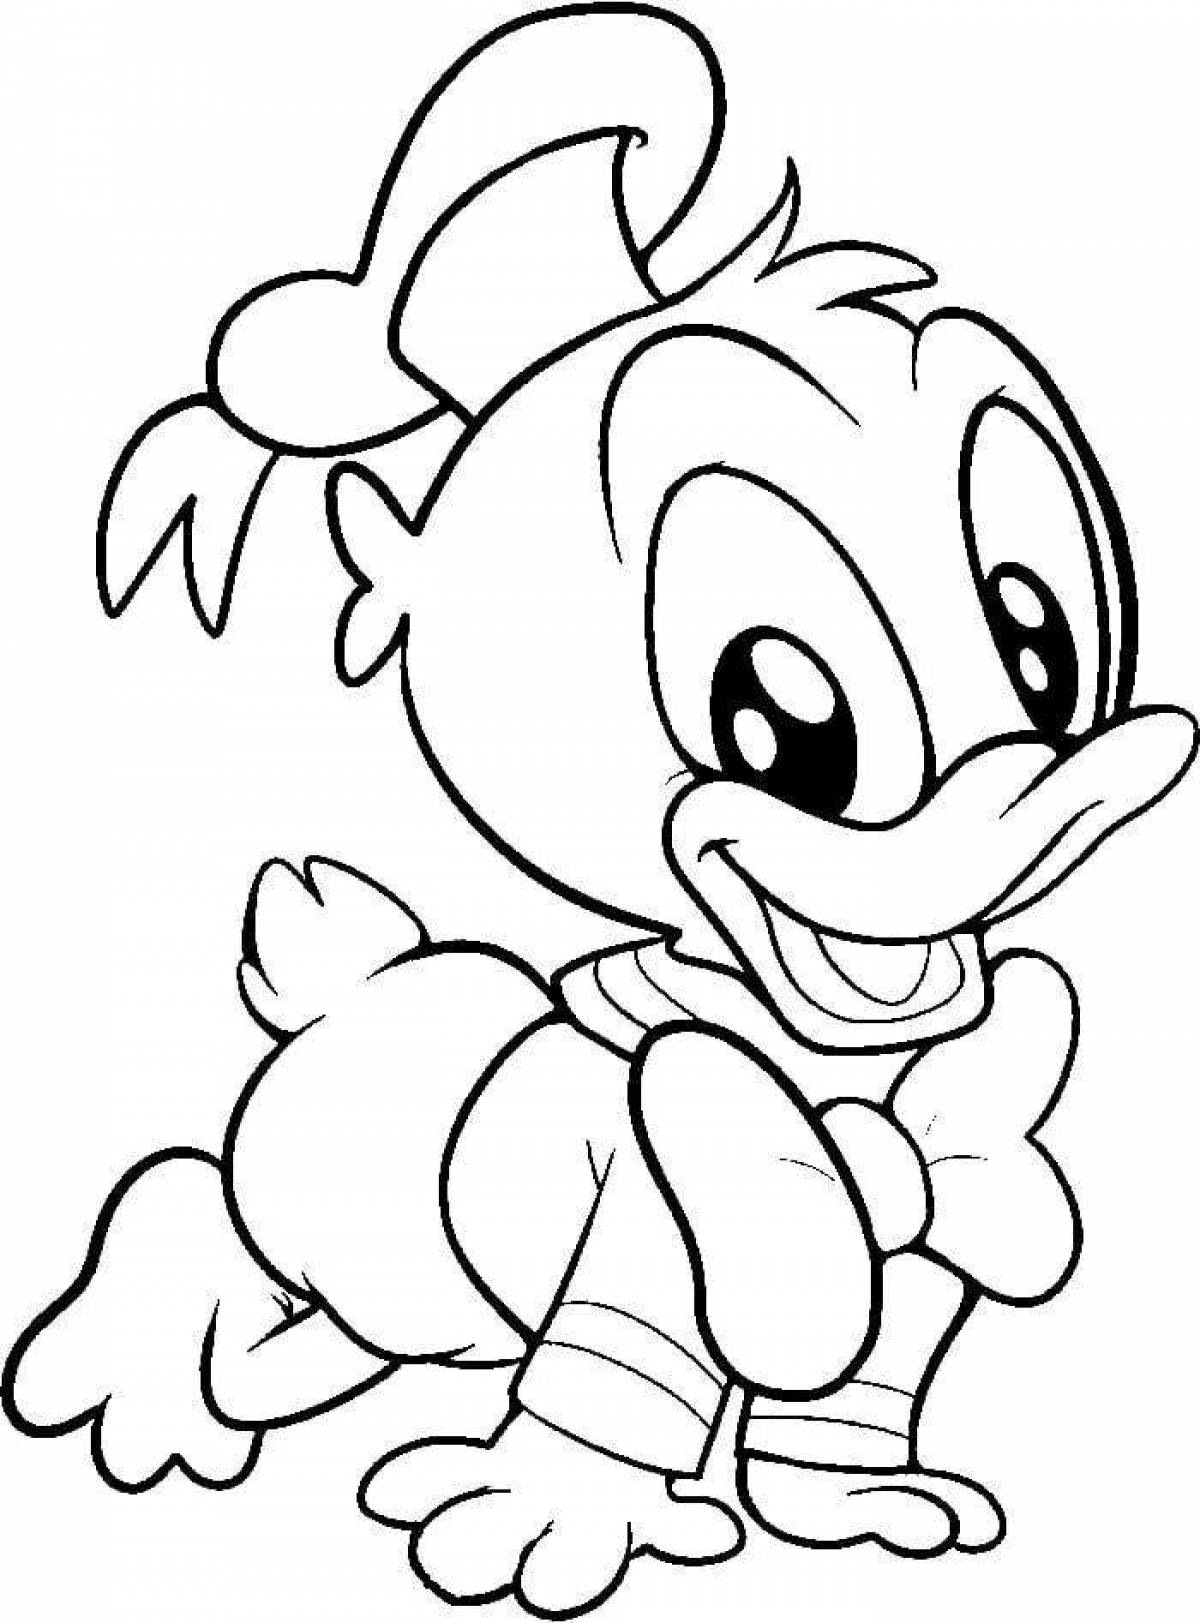 Coloring pages with dazzling cartoon characters for kids